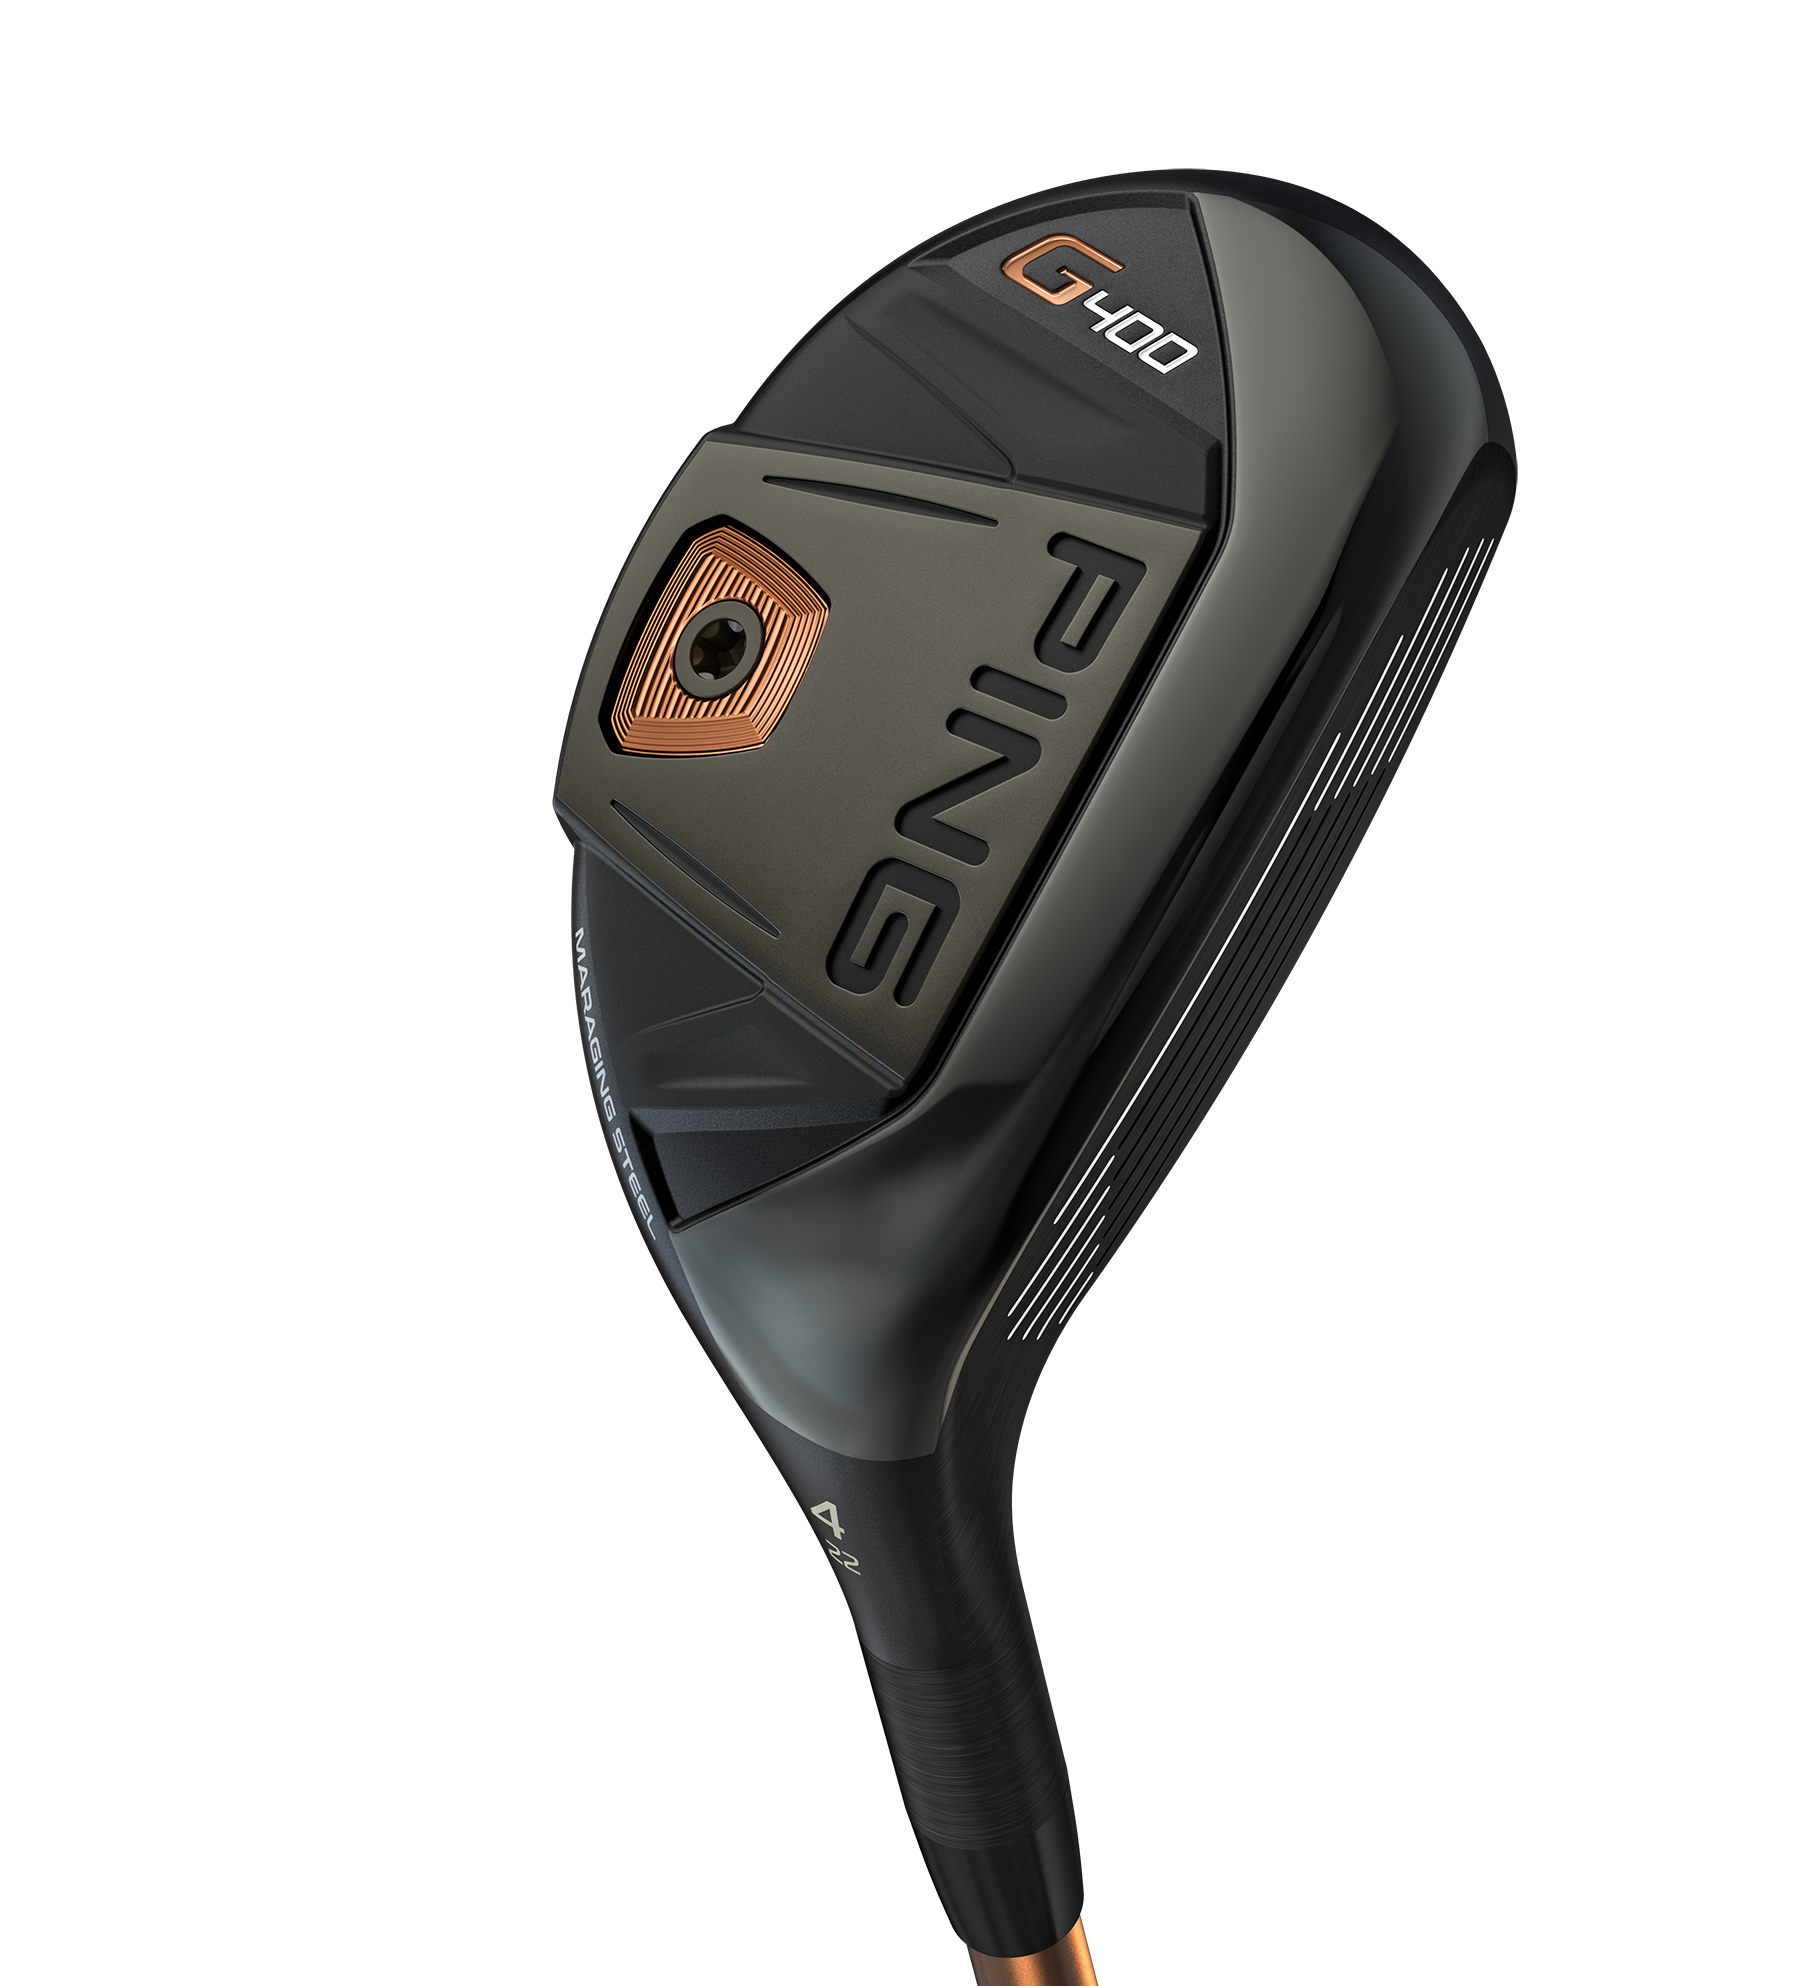 PING launches G400 range